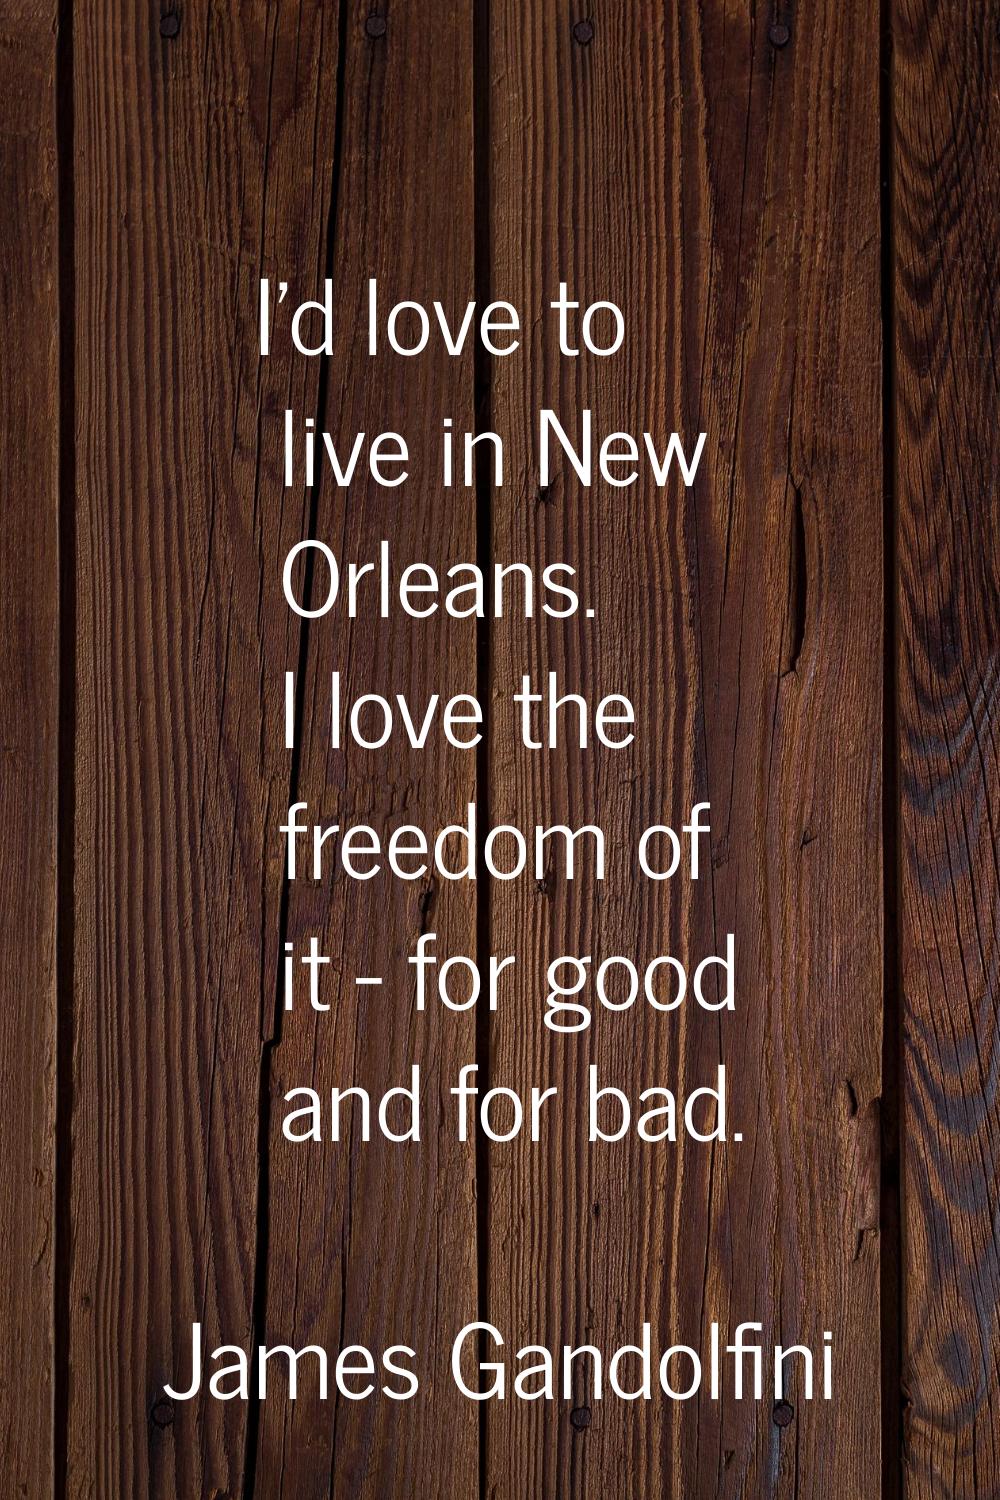 I'd love to live in New Orleans. I love the freedom of it - for good and for bad.